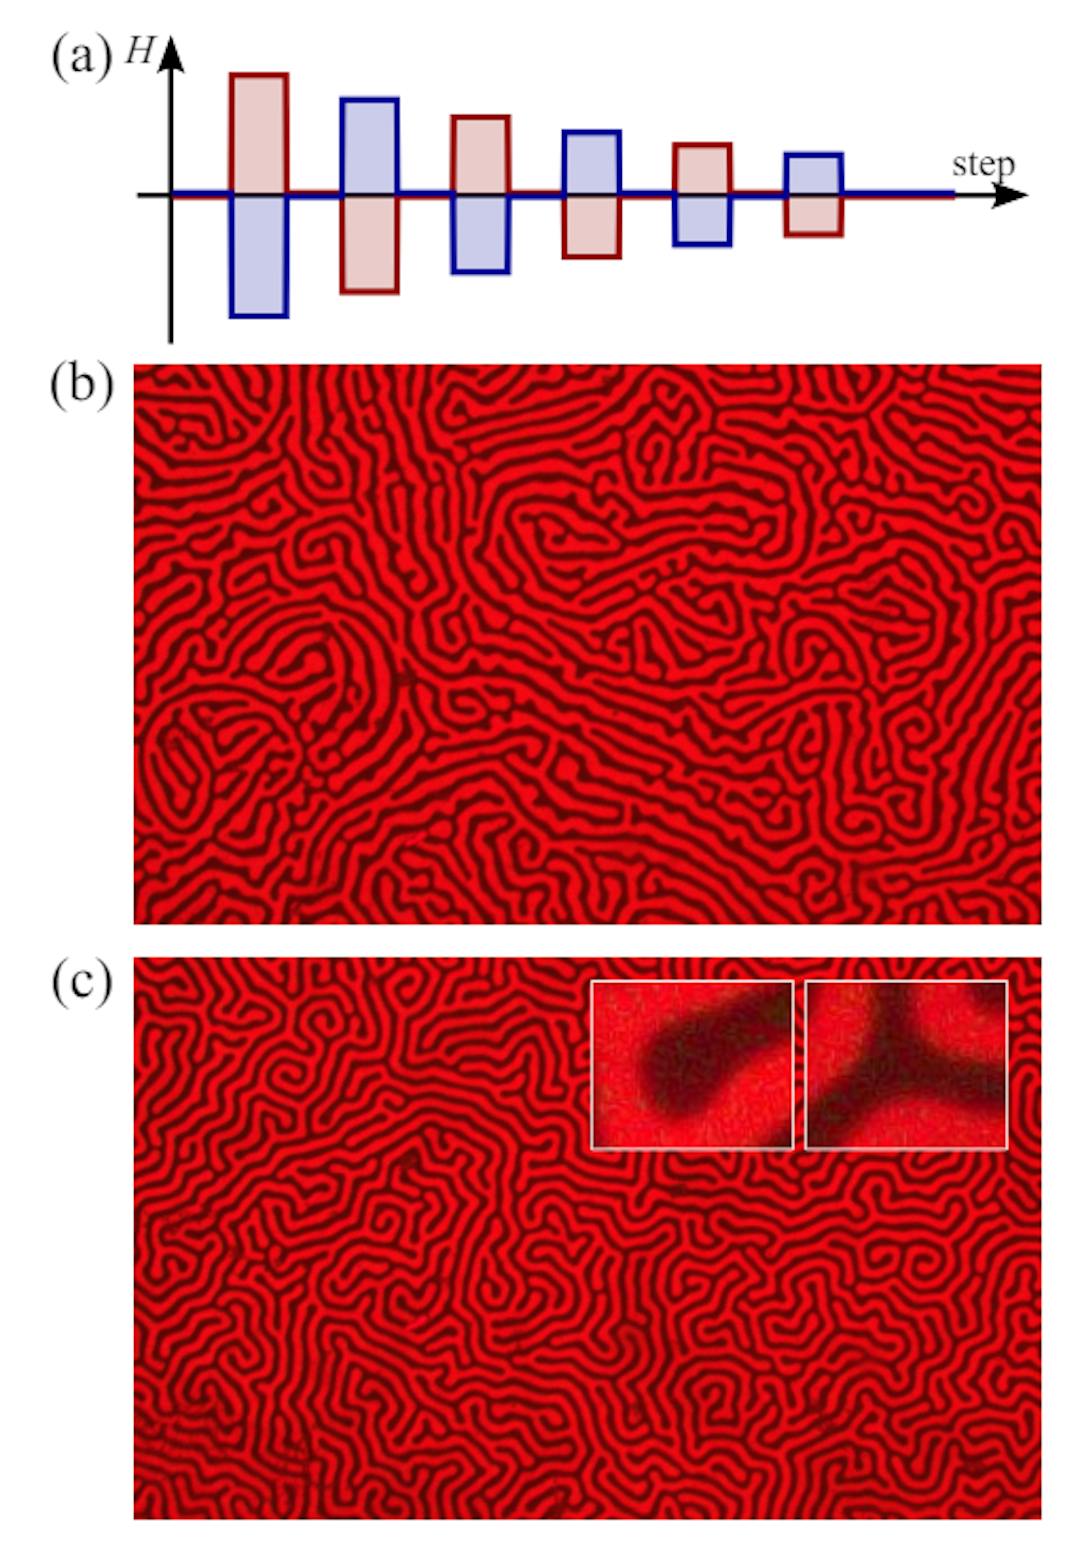 FIG. 1. (a) Schematic figure of the external magnetic field stepping protocol. The sequence starting from the positive (negative) magnetic field is denoted by the red (blue) line. Domain images of (b) the quenched state at step 0 and (c) the annealed state at step 36. The left and right insets in (c) display the structures of a terminal and a junction, respectively.